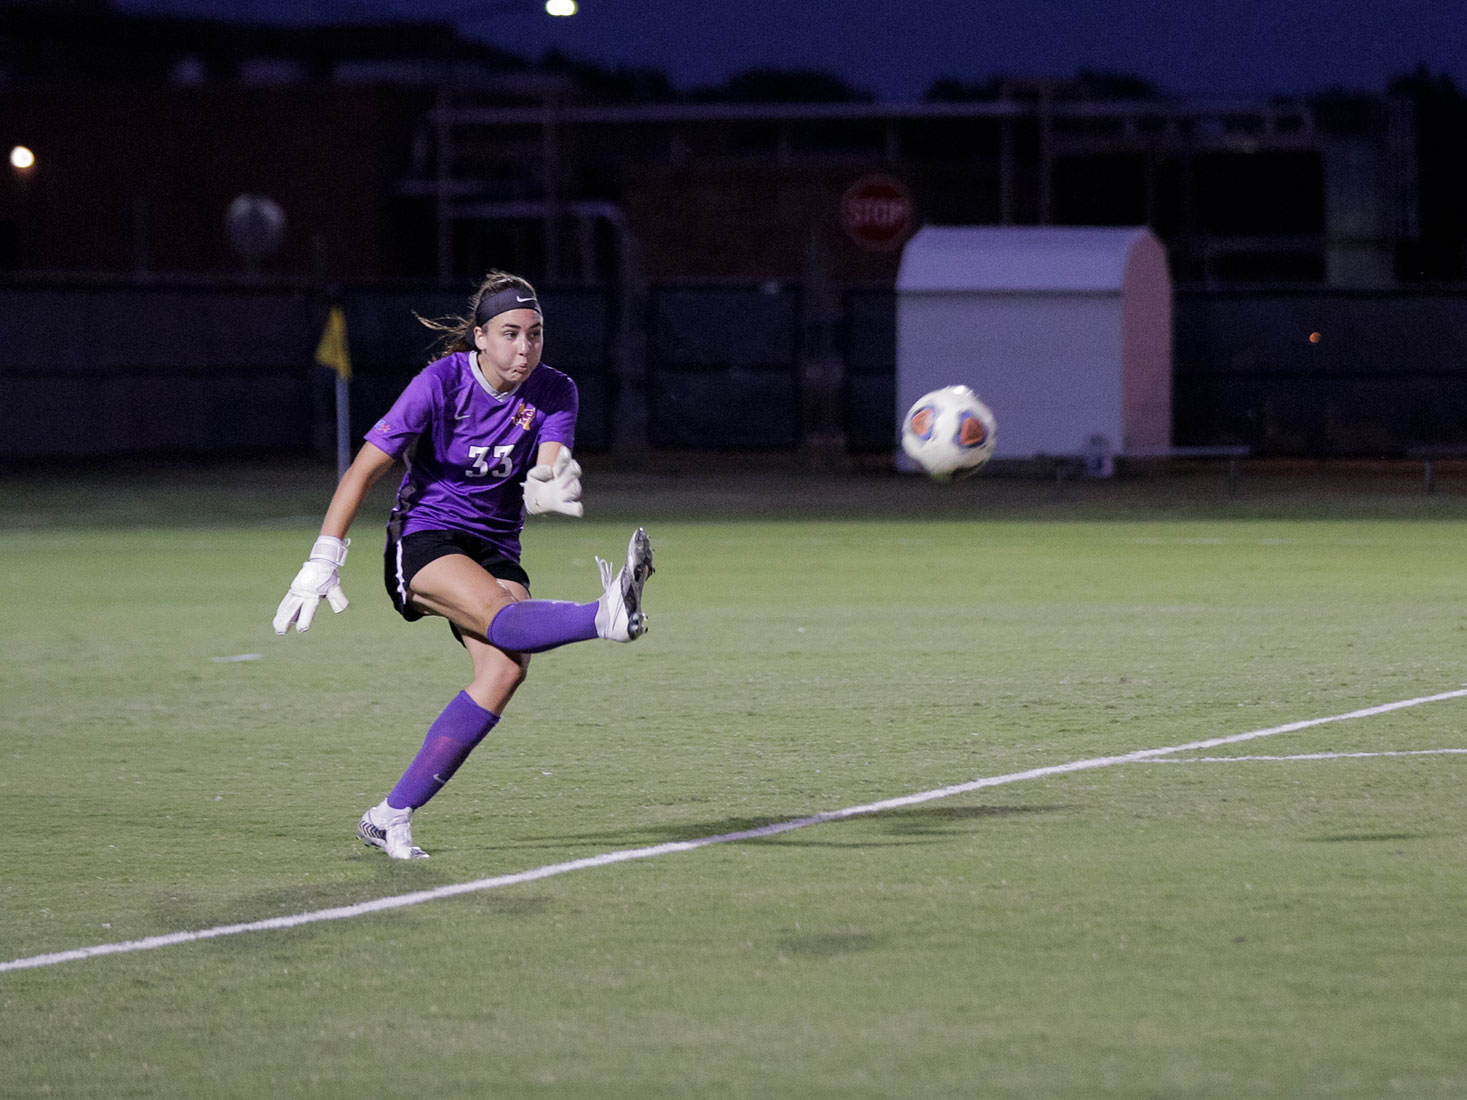 Sport and leisure studies senior and goalkeeper Taylor Camp kicks the ball across the field